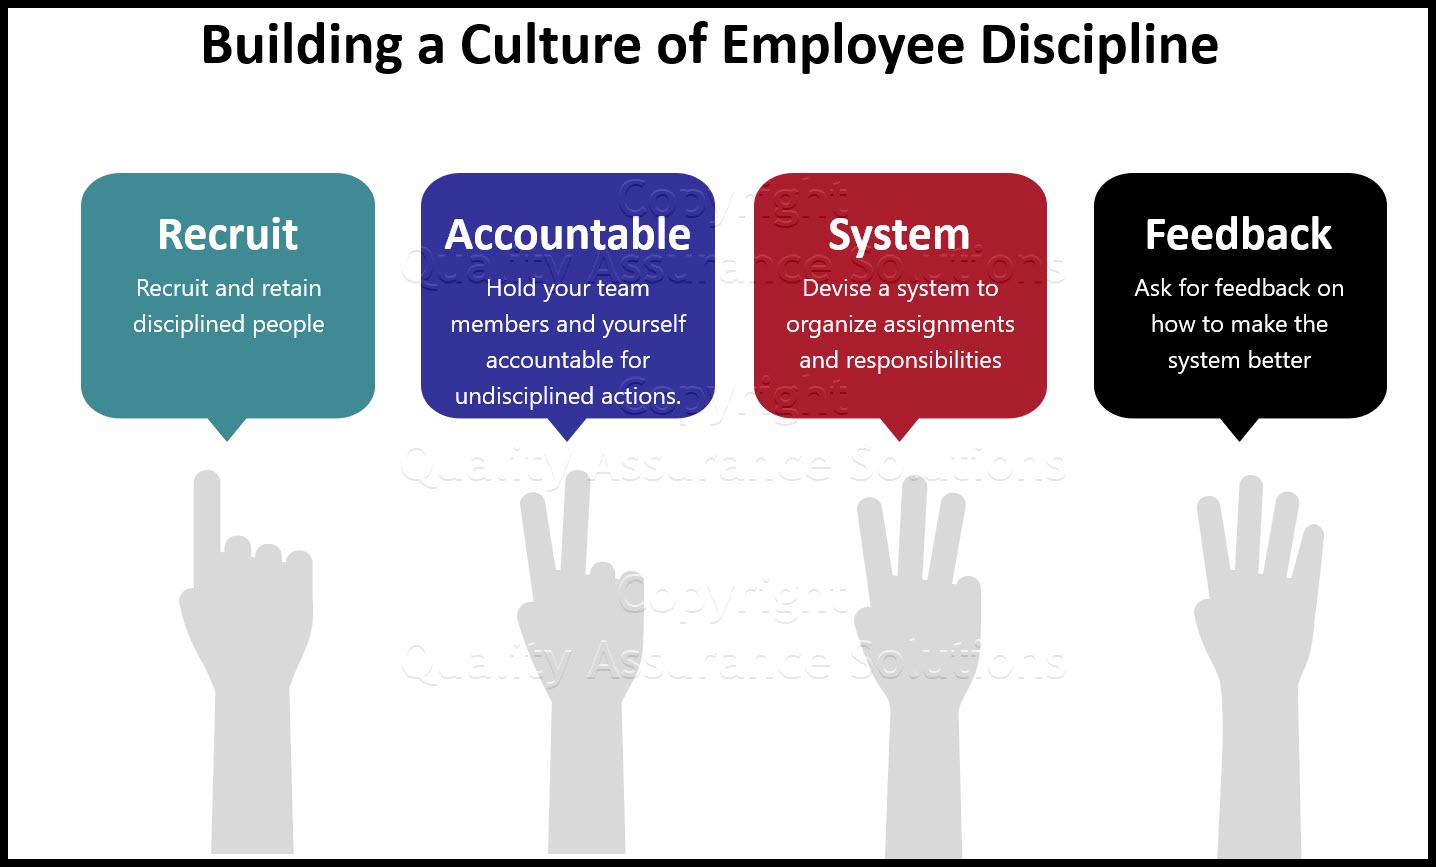 Most teams lack employee discipline because they lack a program that works for their objectives.